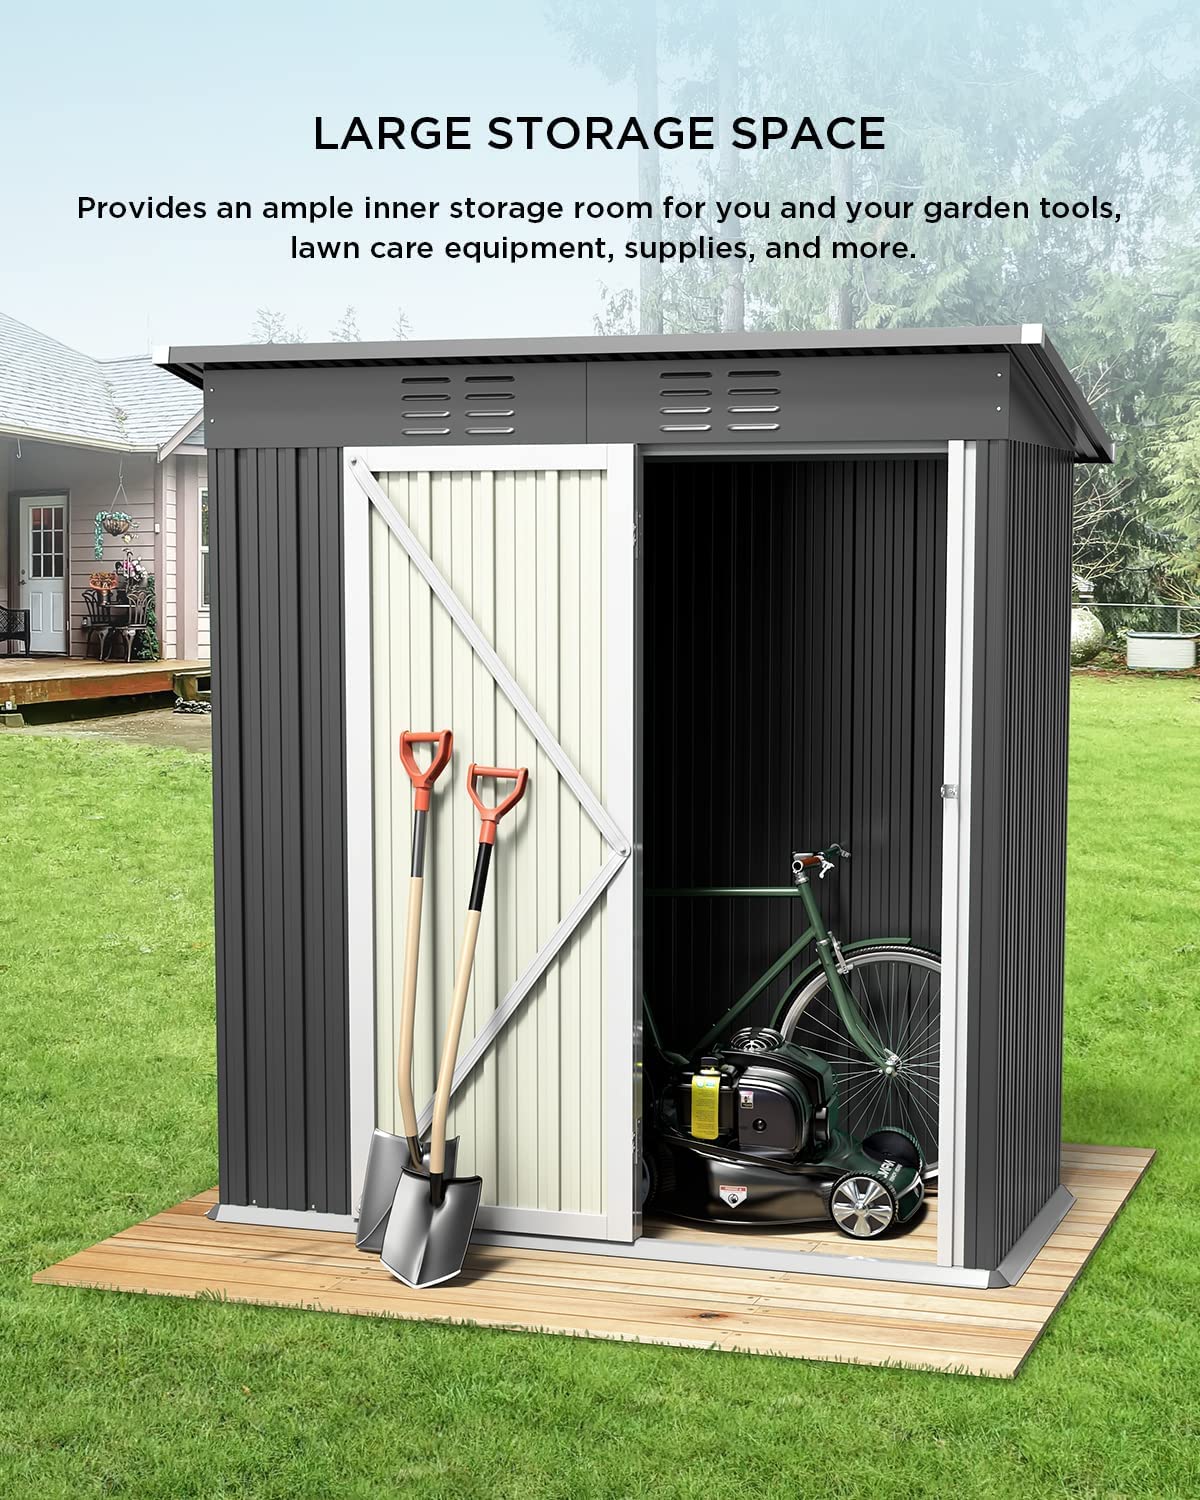 5' x 3' Outdoor Storage Shed, Metal Outdoor Storage Cabinet with Single Lockable Door, Waterproof Tool Shed,Gray - image 4 of 8